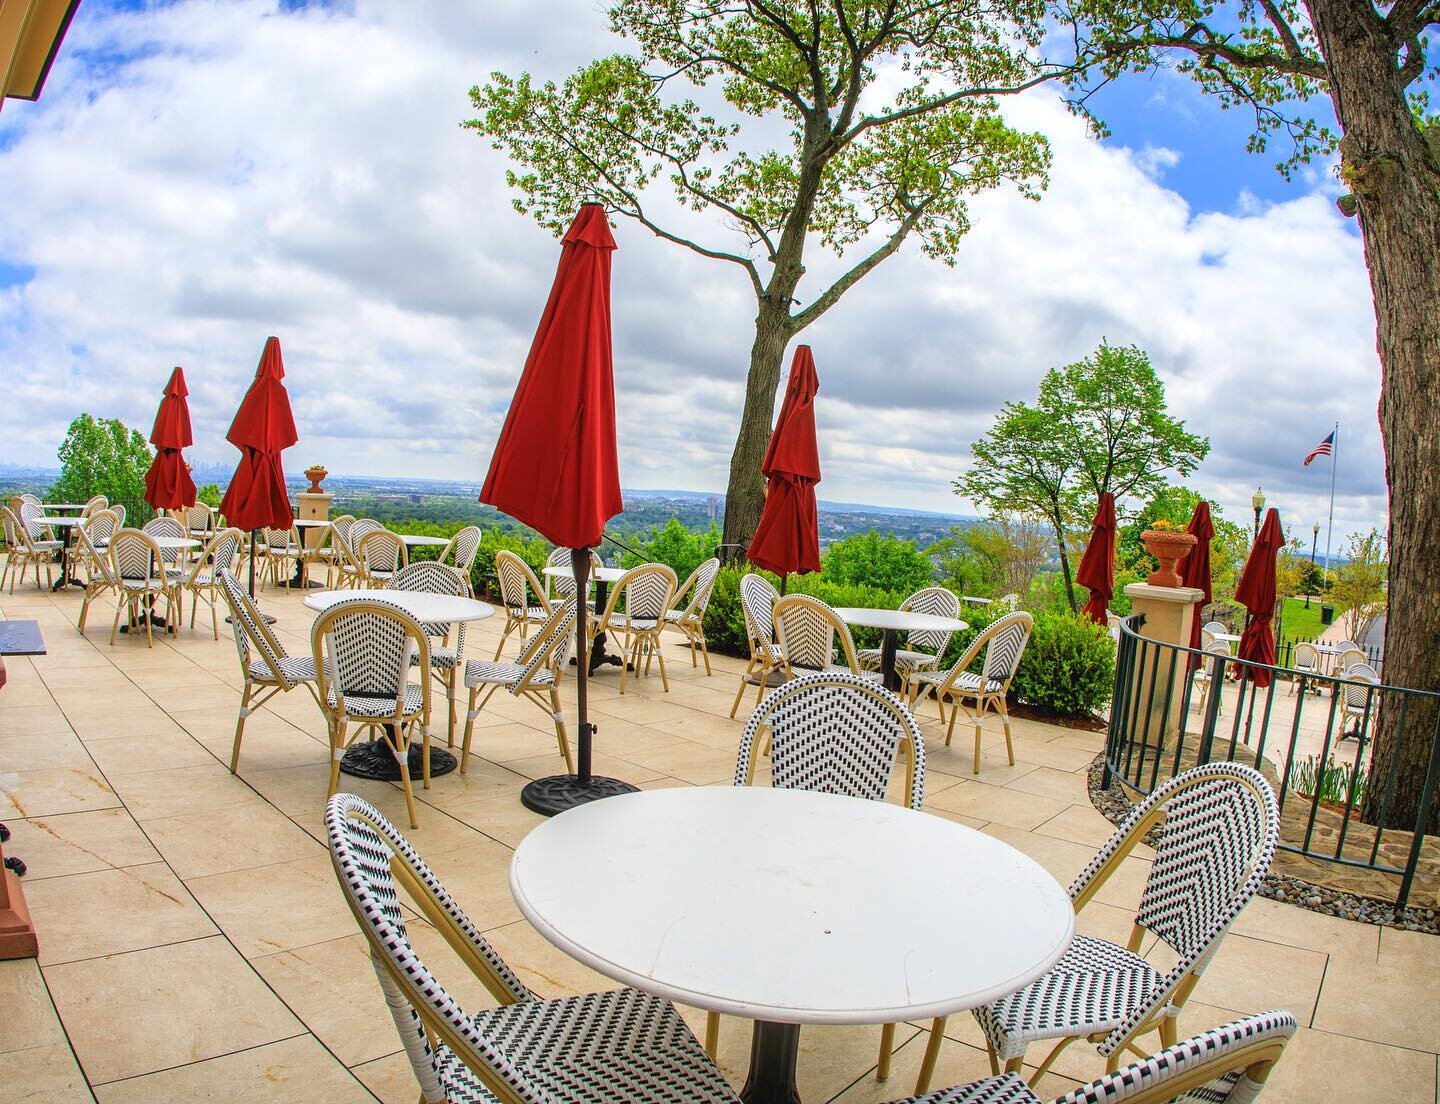 Upper or lower patio? ☀️ 

Spend the last day of August (coincidentally #NationalEatOutsideDay - yes, that&rsquo;s real) by basking in our sun-drenched view. After all, everything tastes better under the open sky.

____
#restaurant #outdoordining #nj